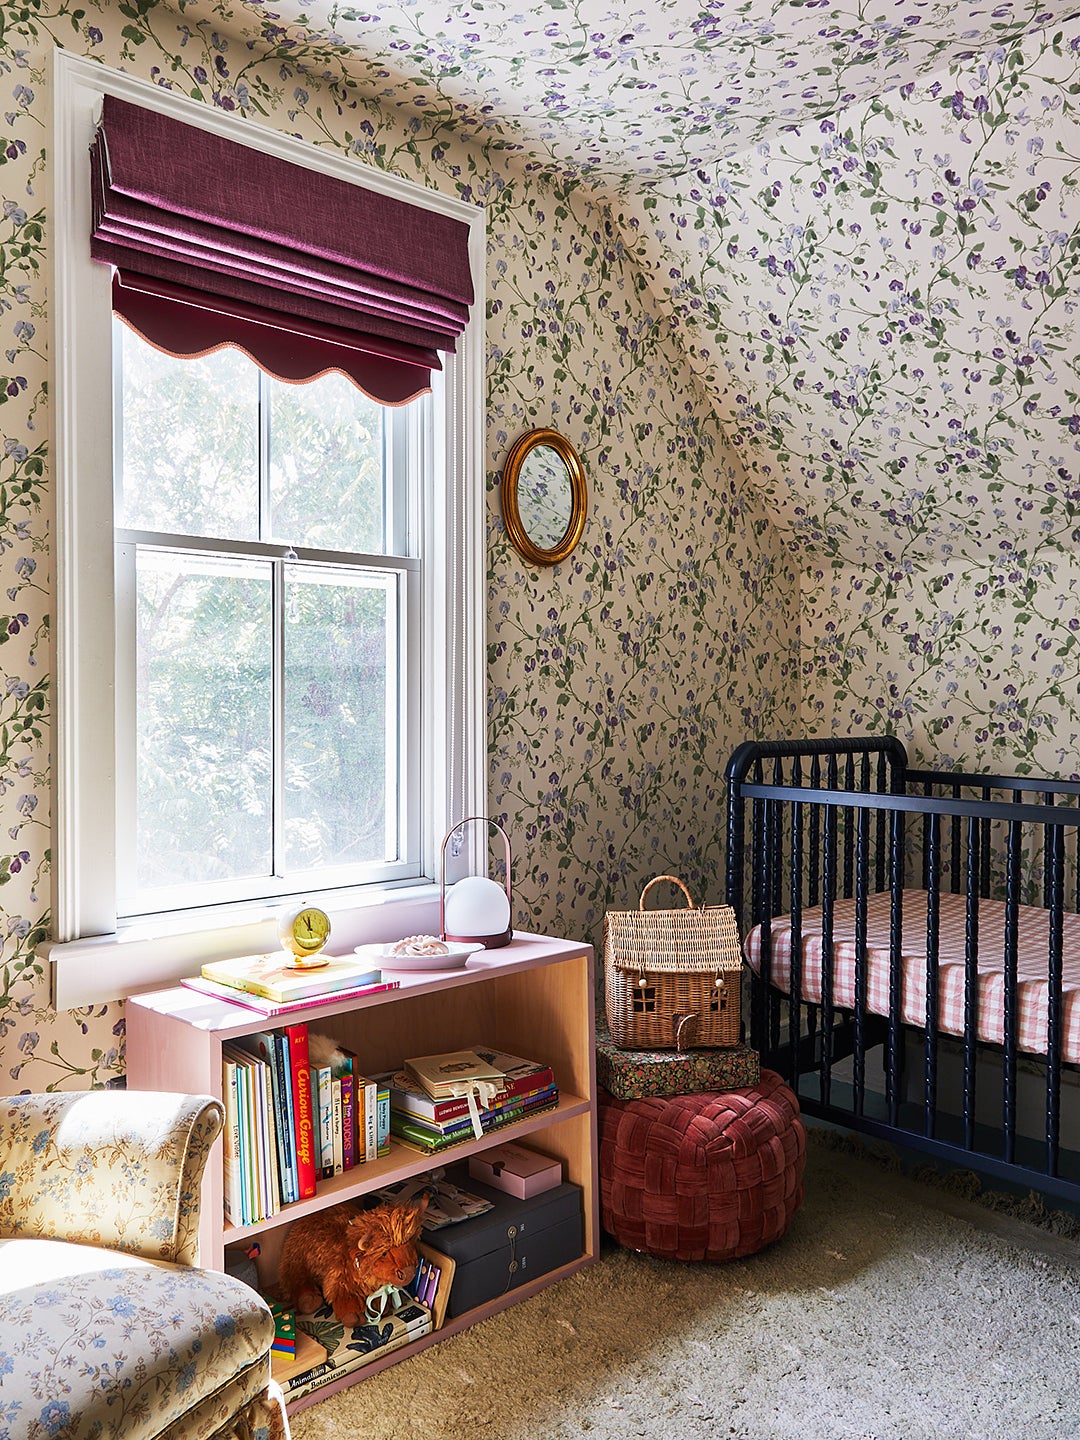 Kids room with crib and floral wallpaper